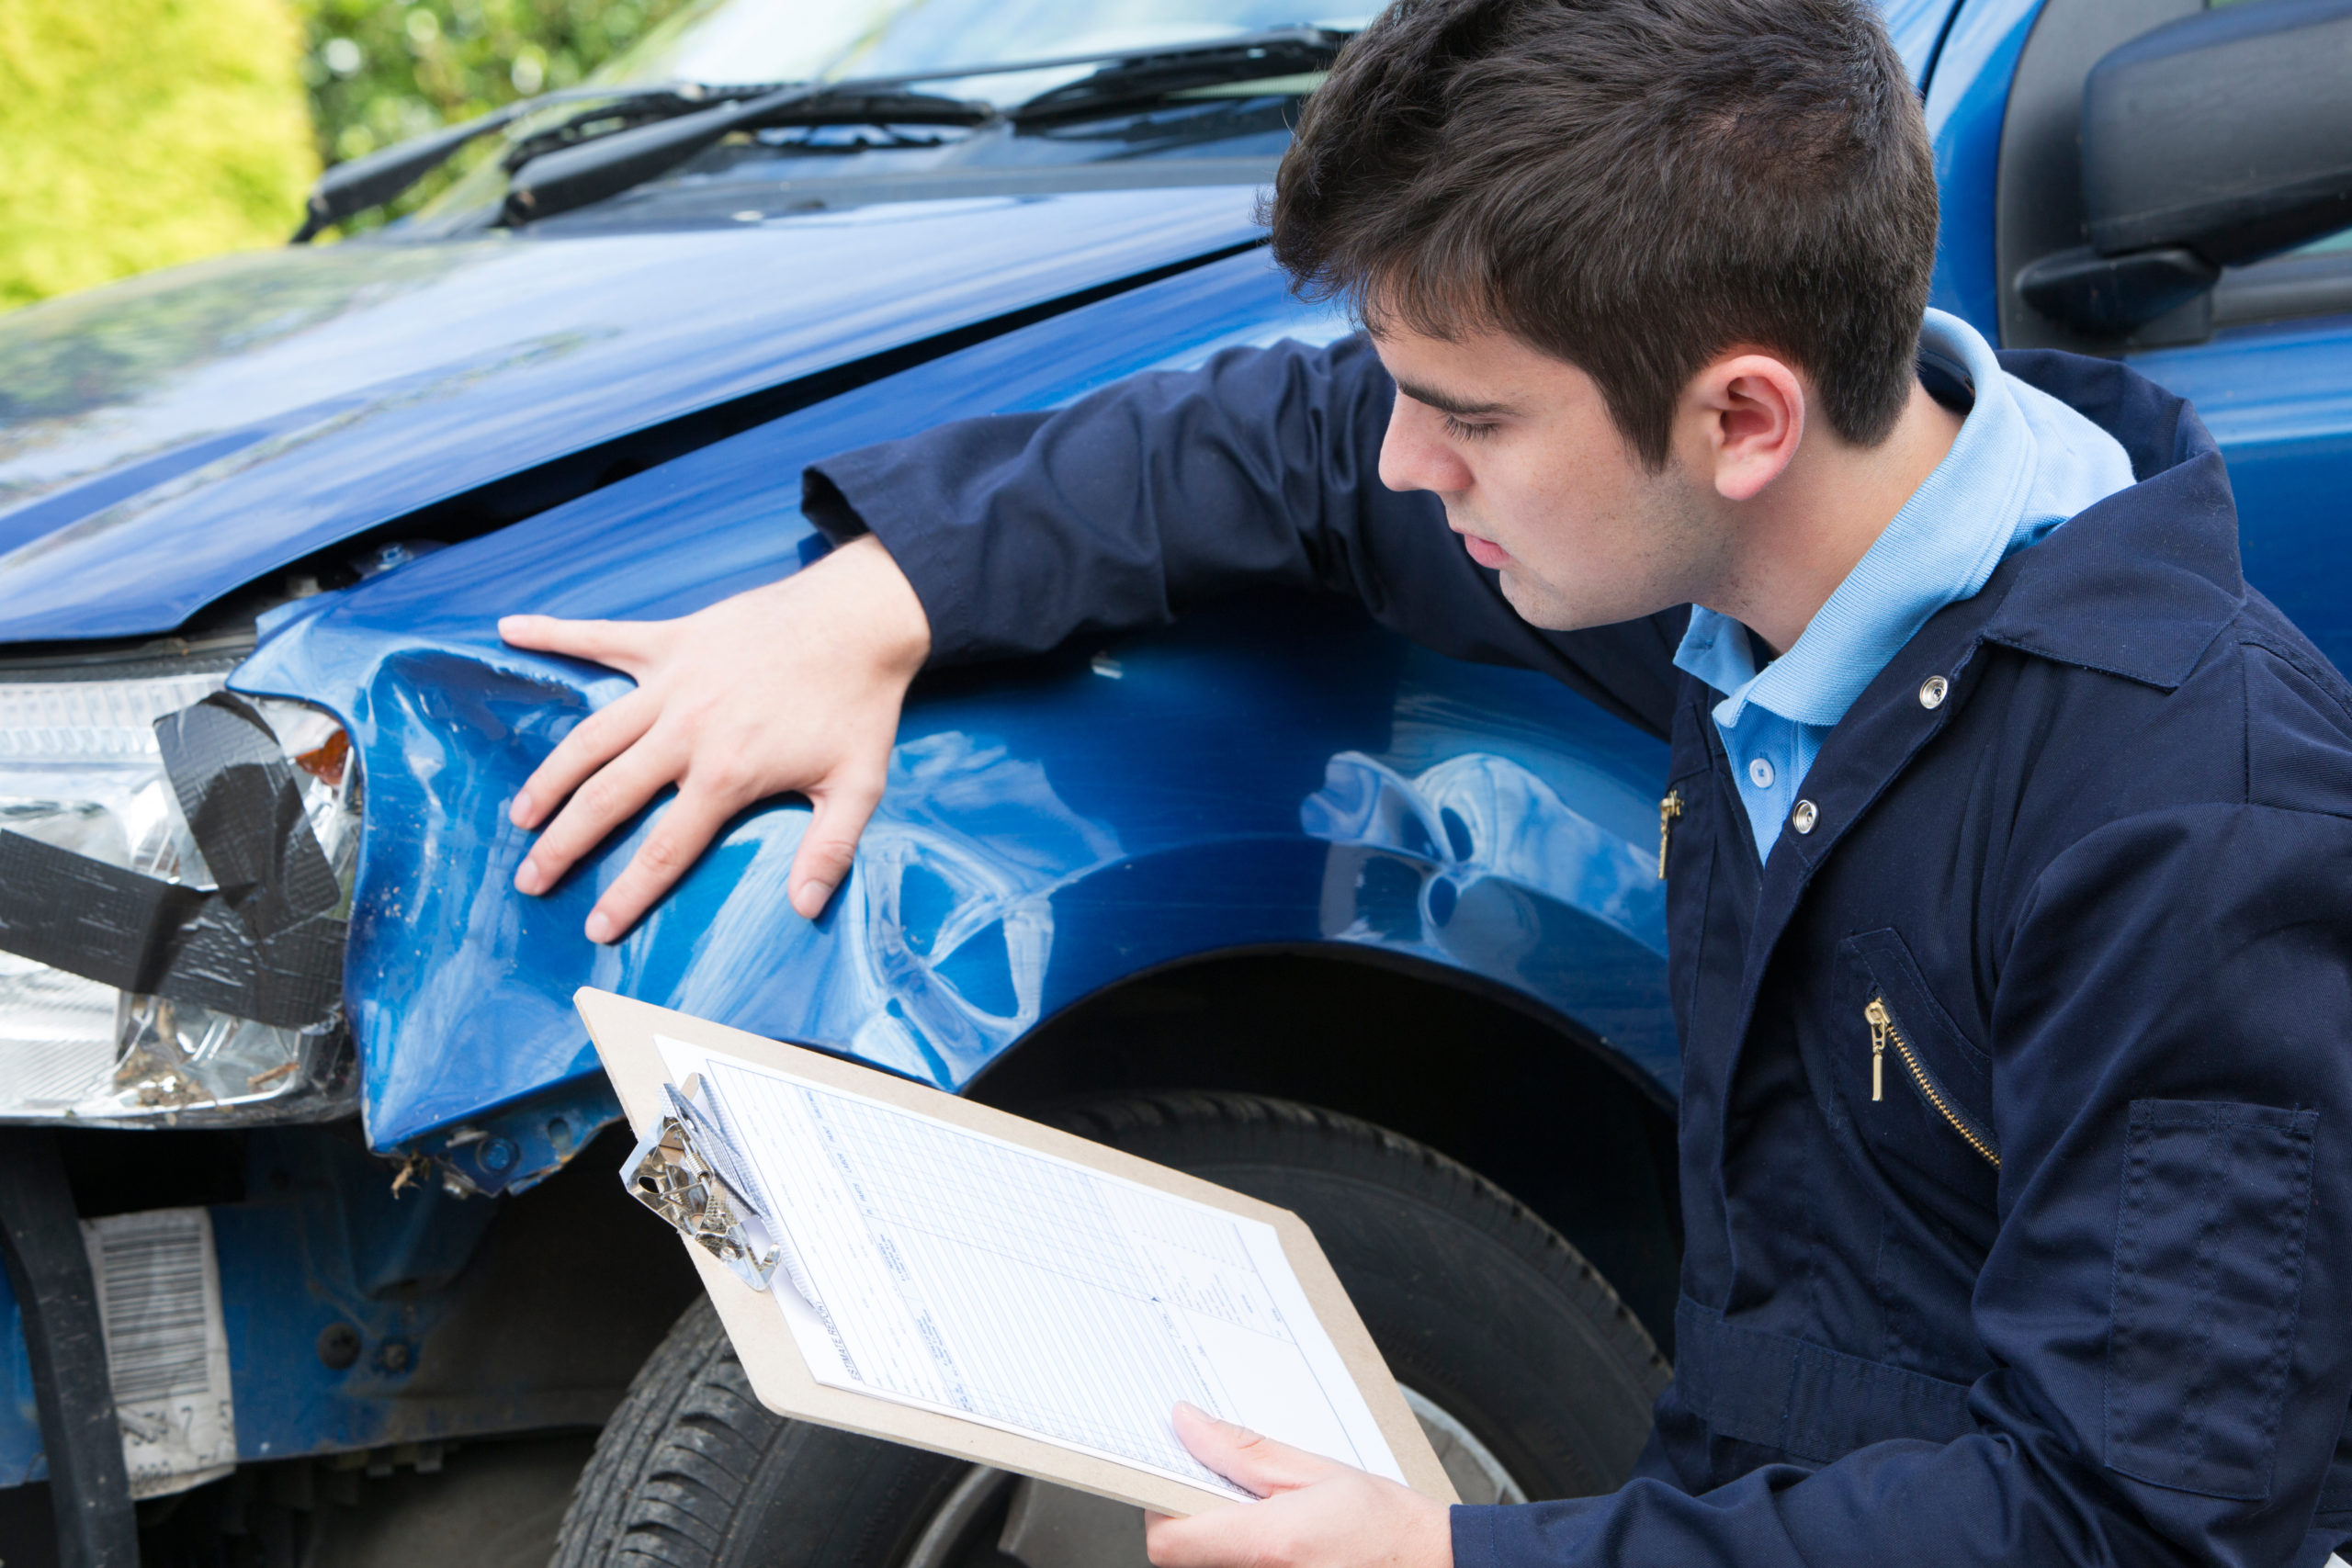 How to Get Your Car Fixed After an Accident